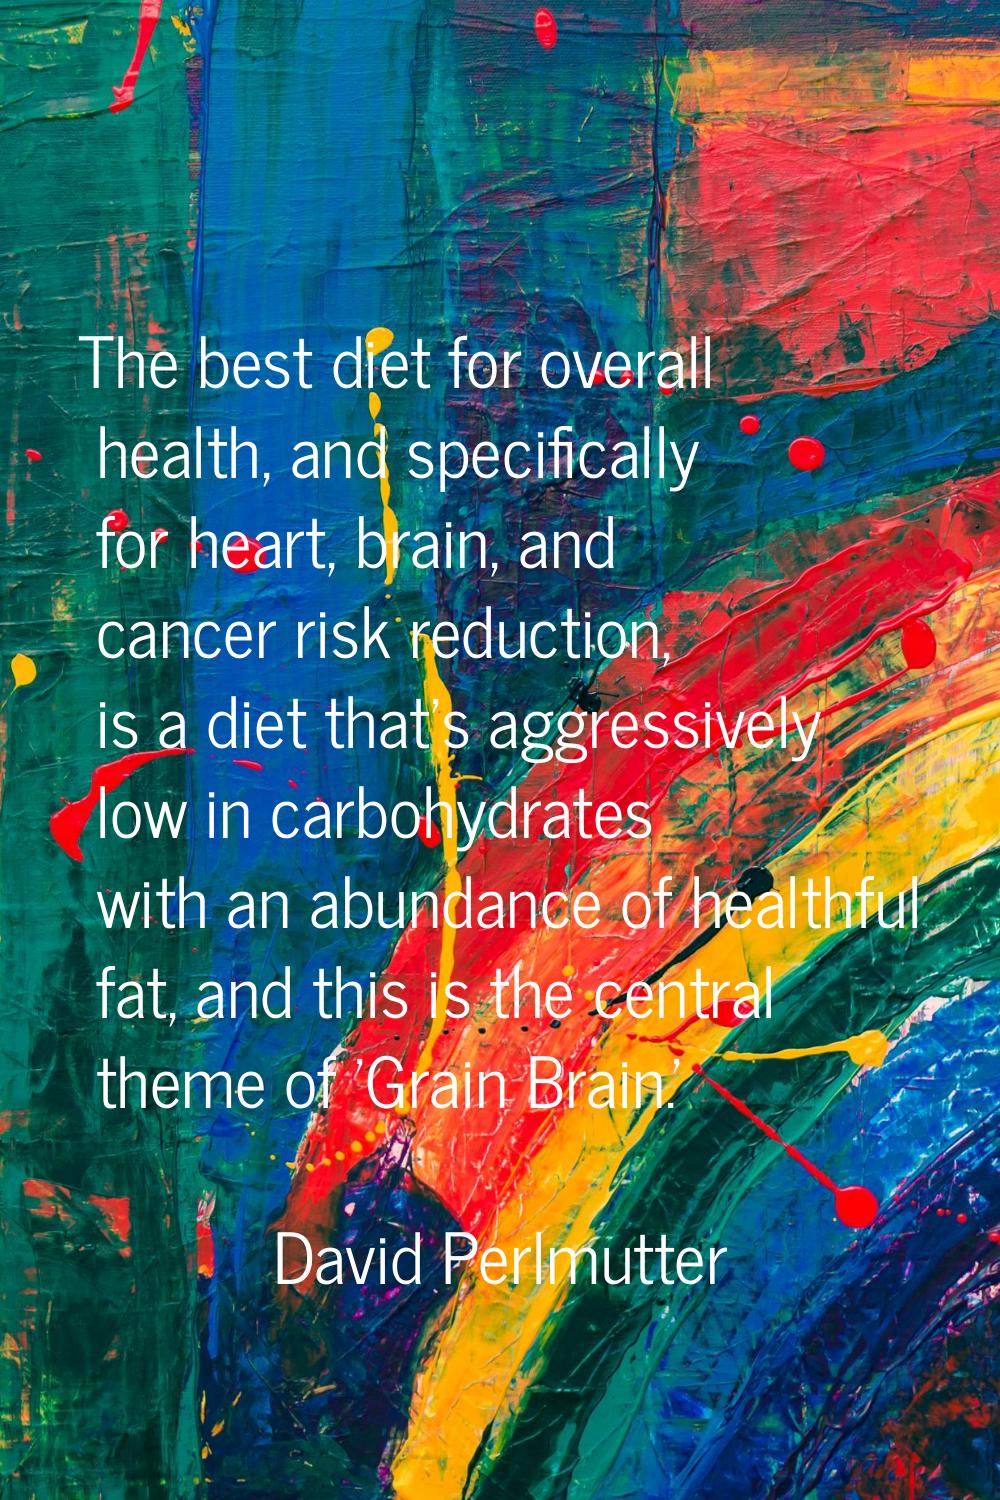 The best diet for overall health, and specifically for heart, brain, and cancer risk reduction, is 